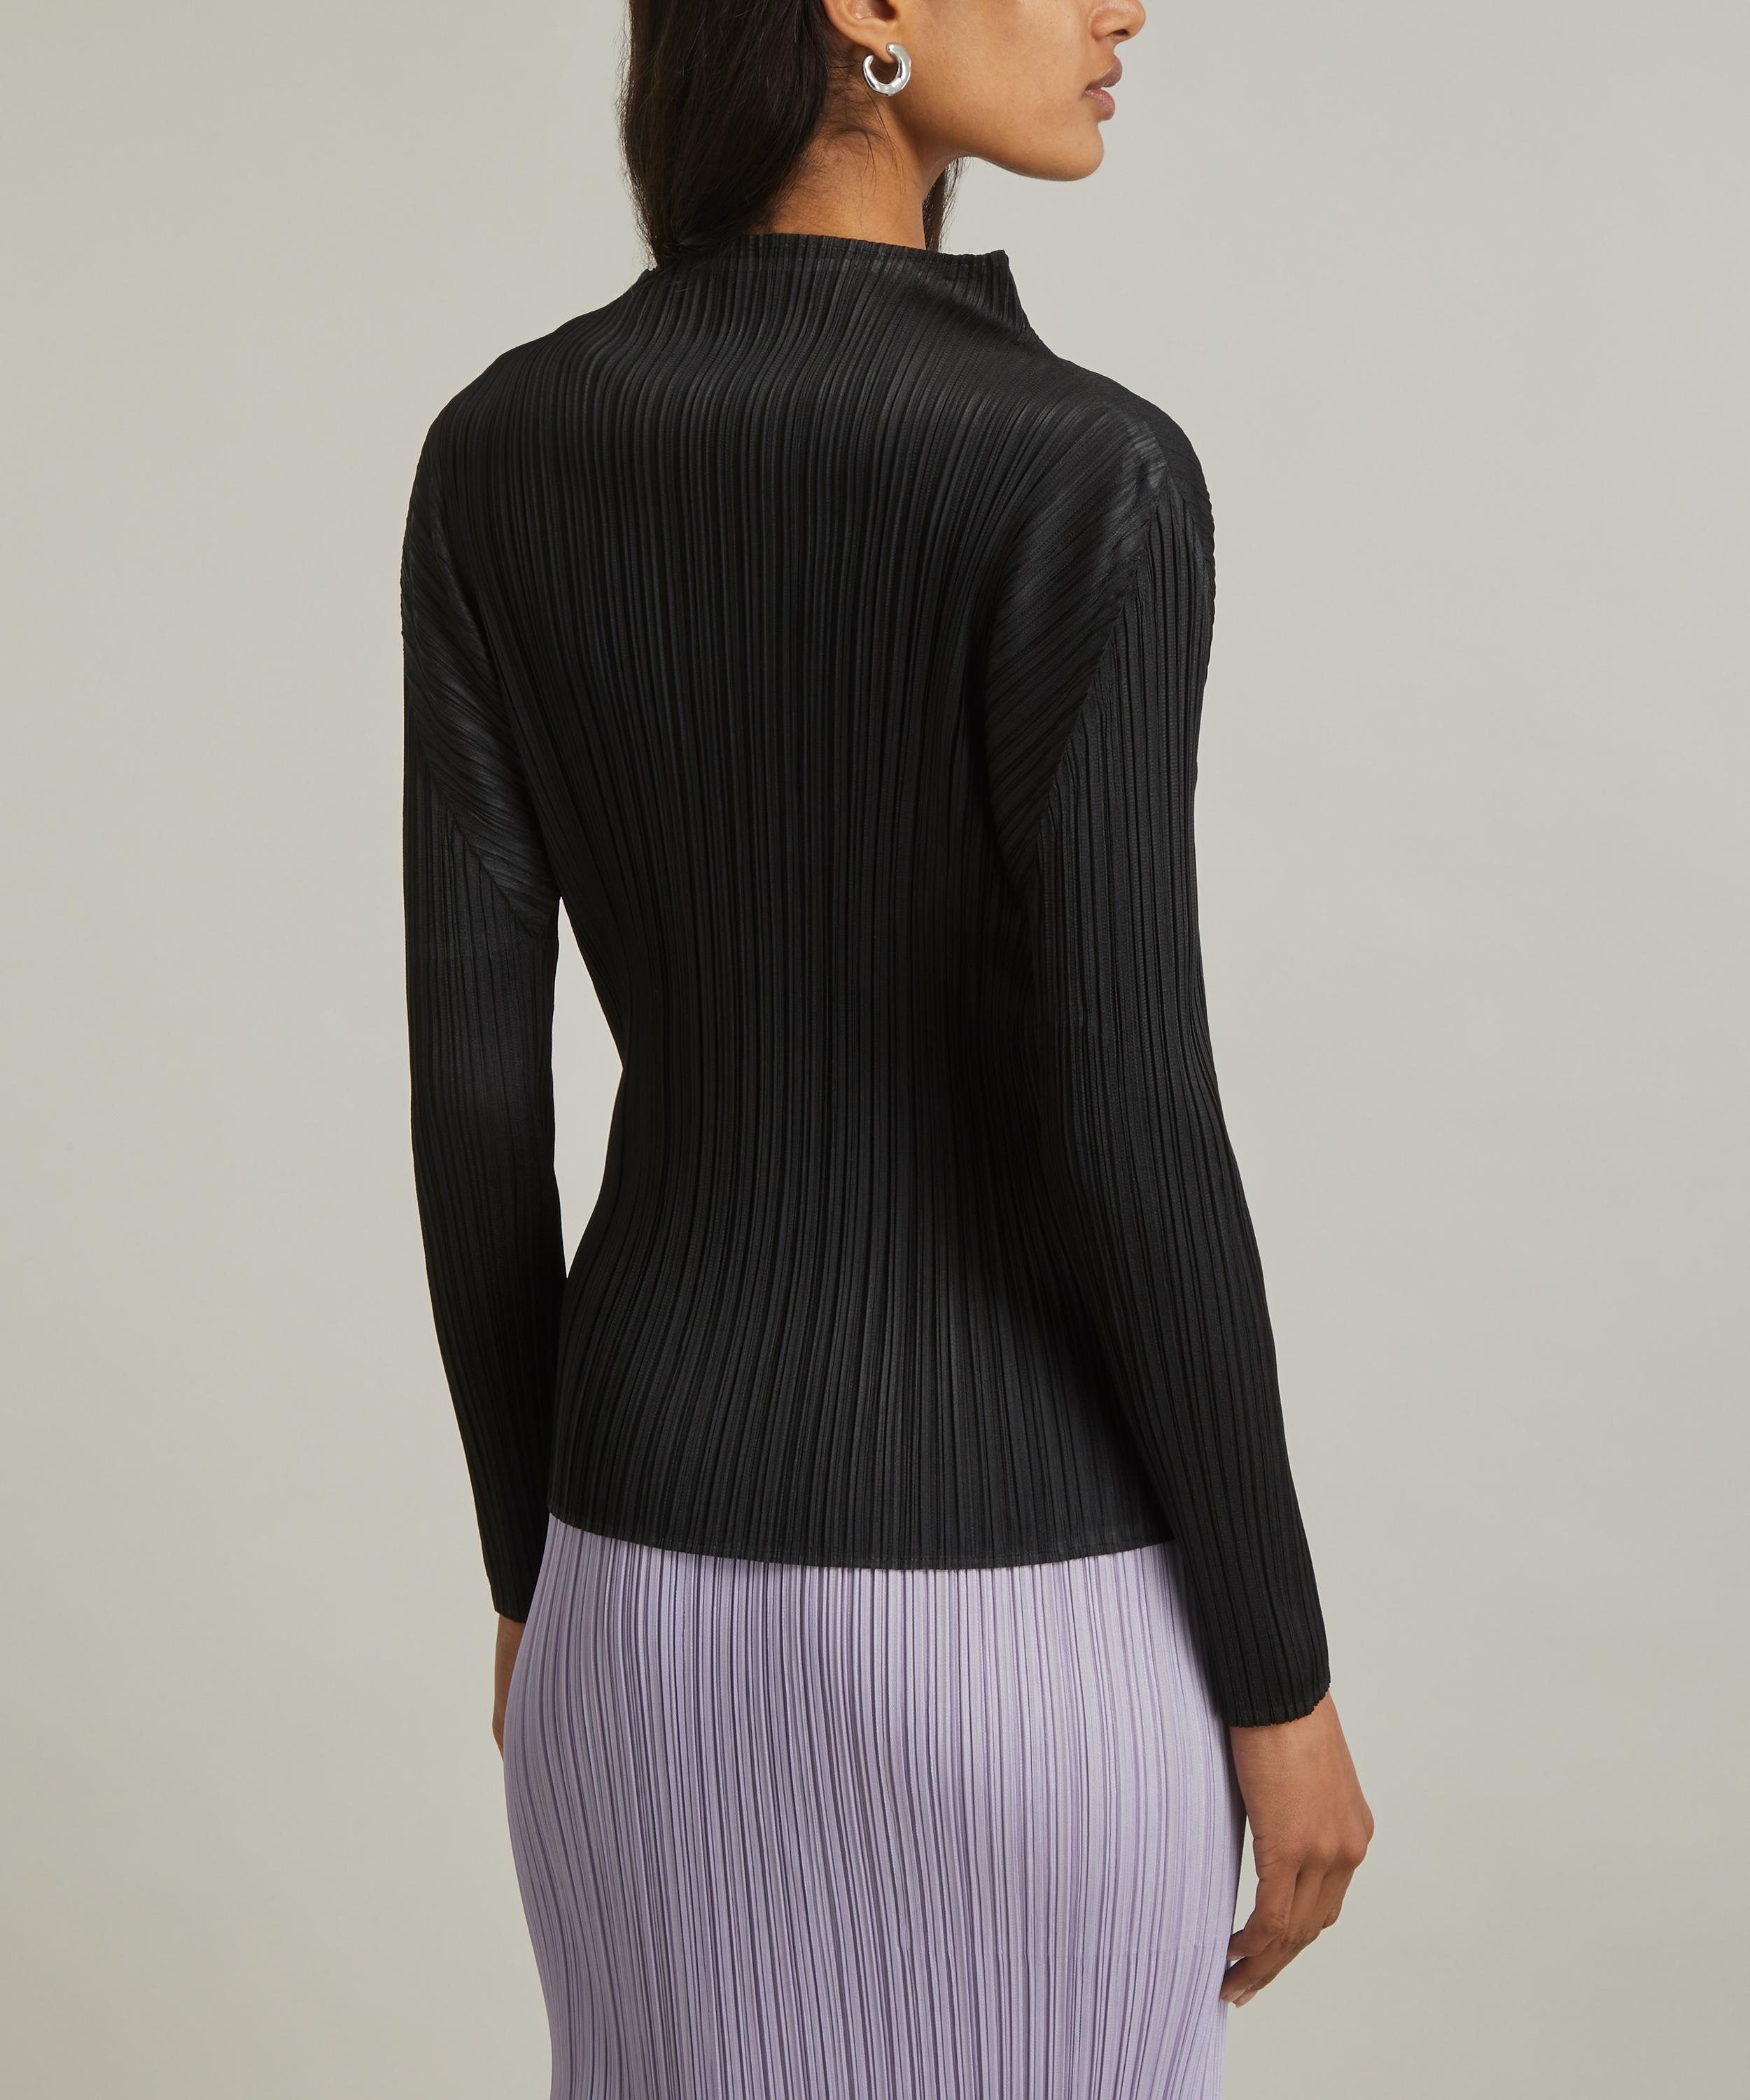 MONTHLY COLOURS NOVEMBER Pleated Black Top - 4